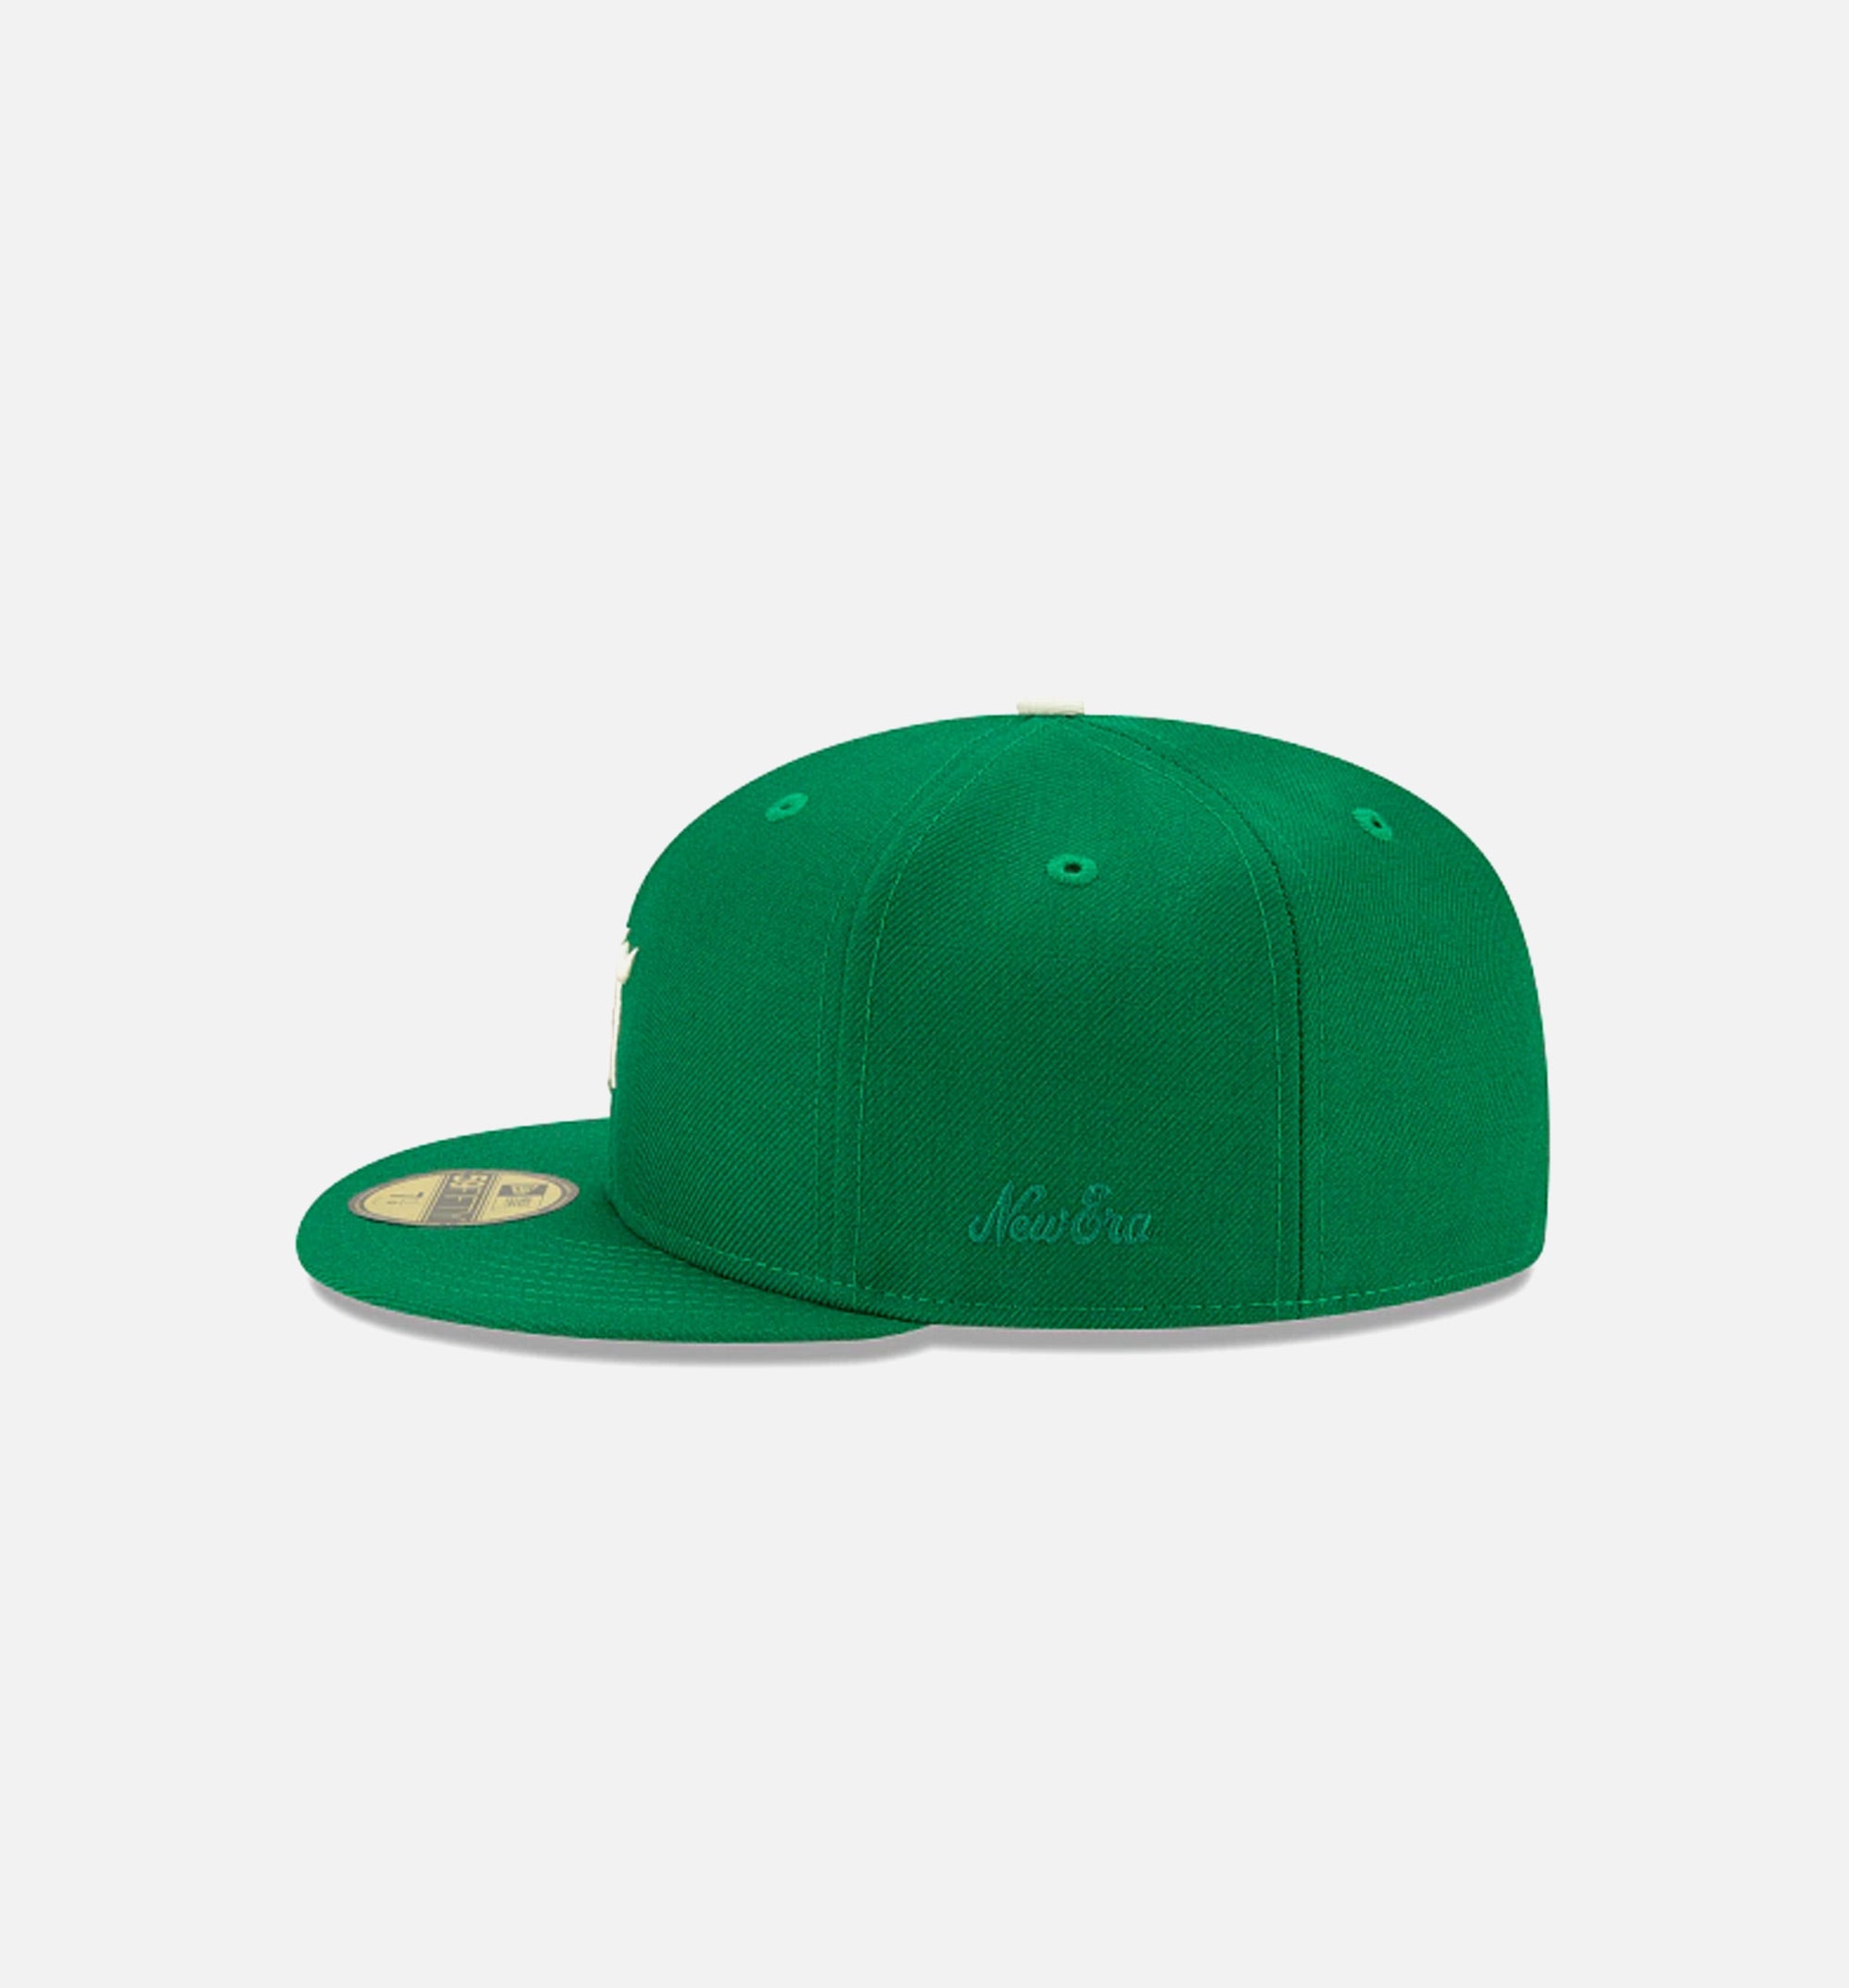 Shop New Era 59Fifty Essentials Fear of God Fitted Hat 60185371 green